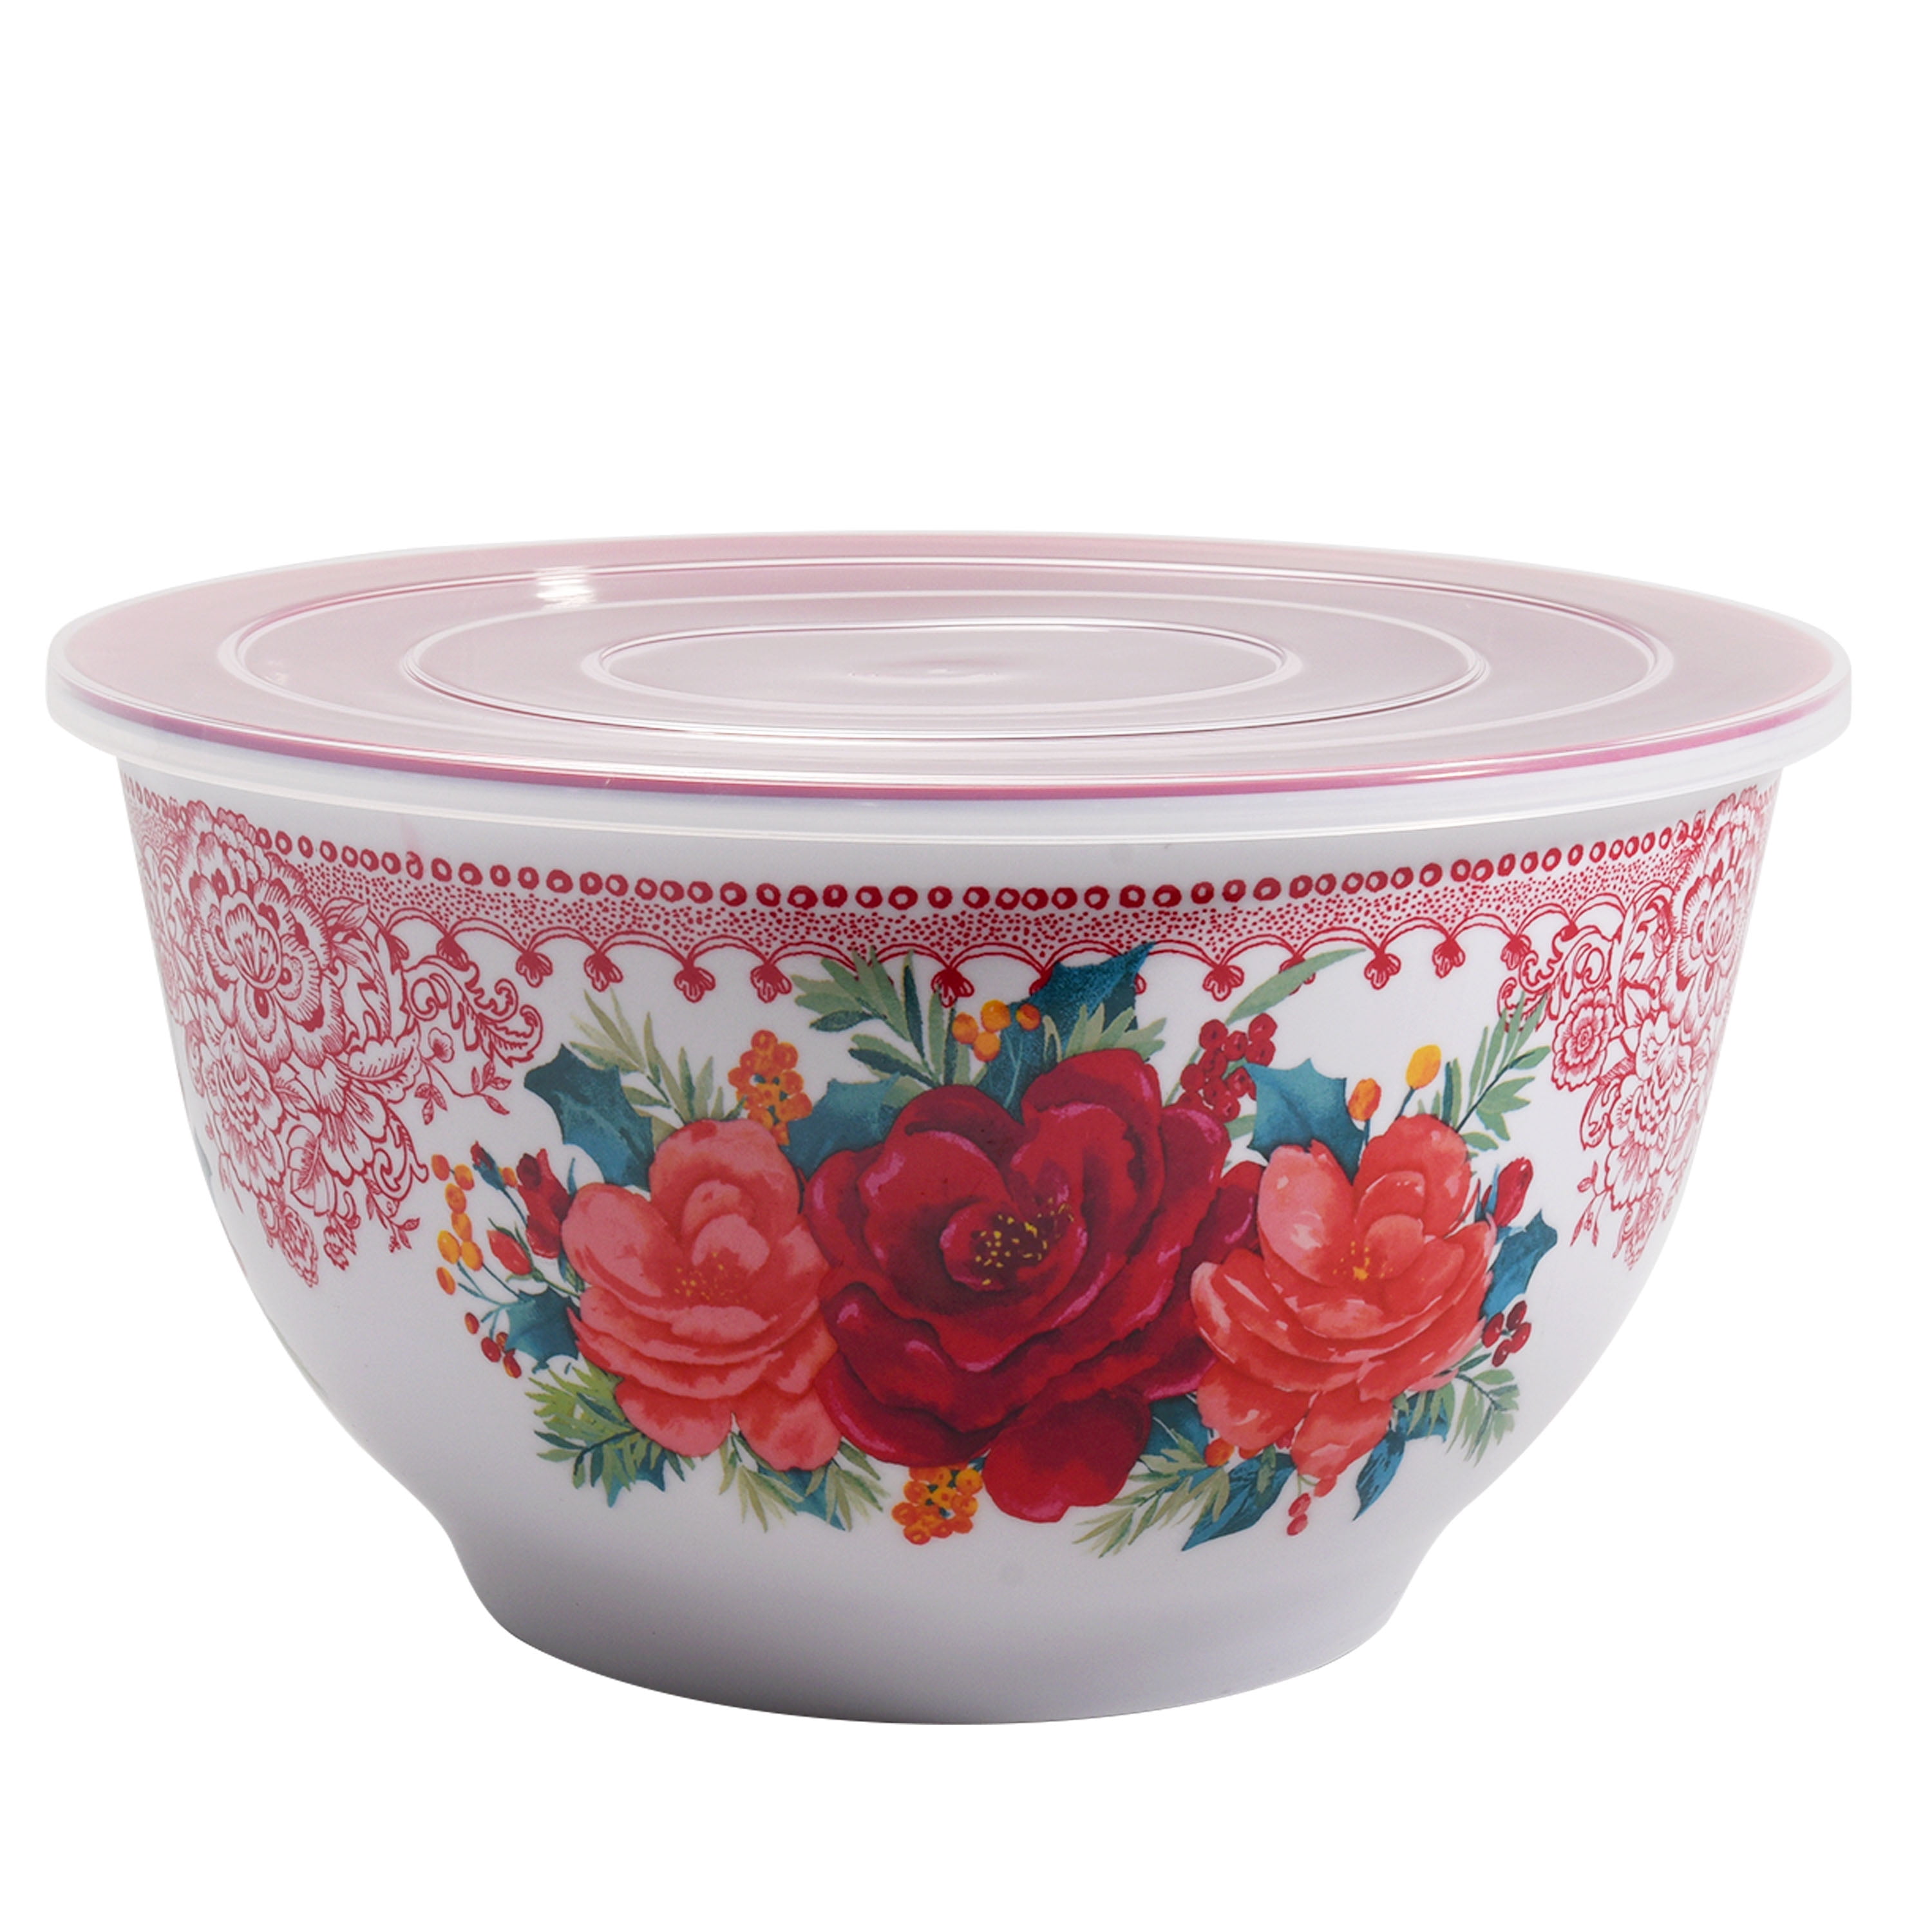 The Pioneer Woman 6-Piece Melamine Cheerful Rose Serving Bowl Set with Lids